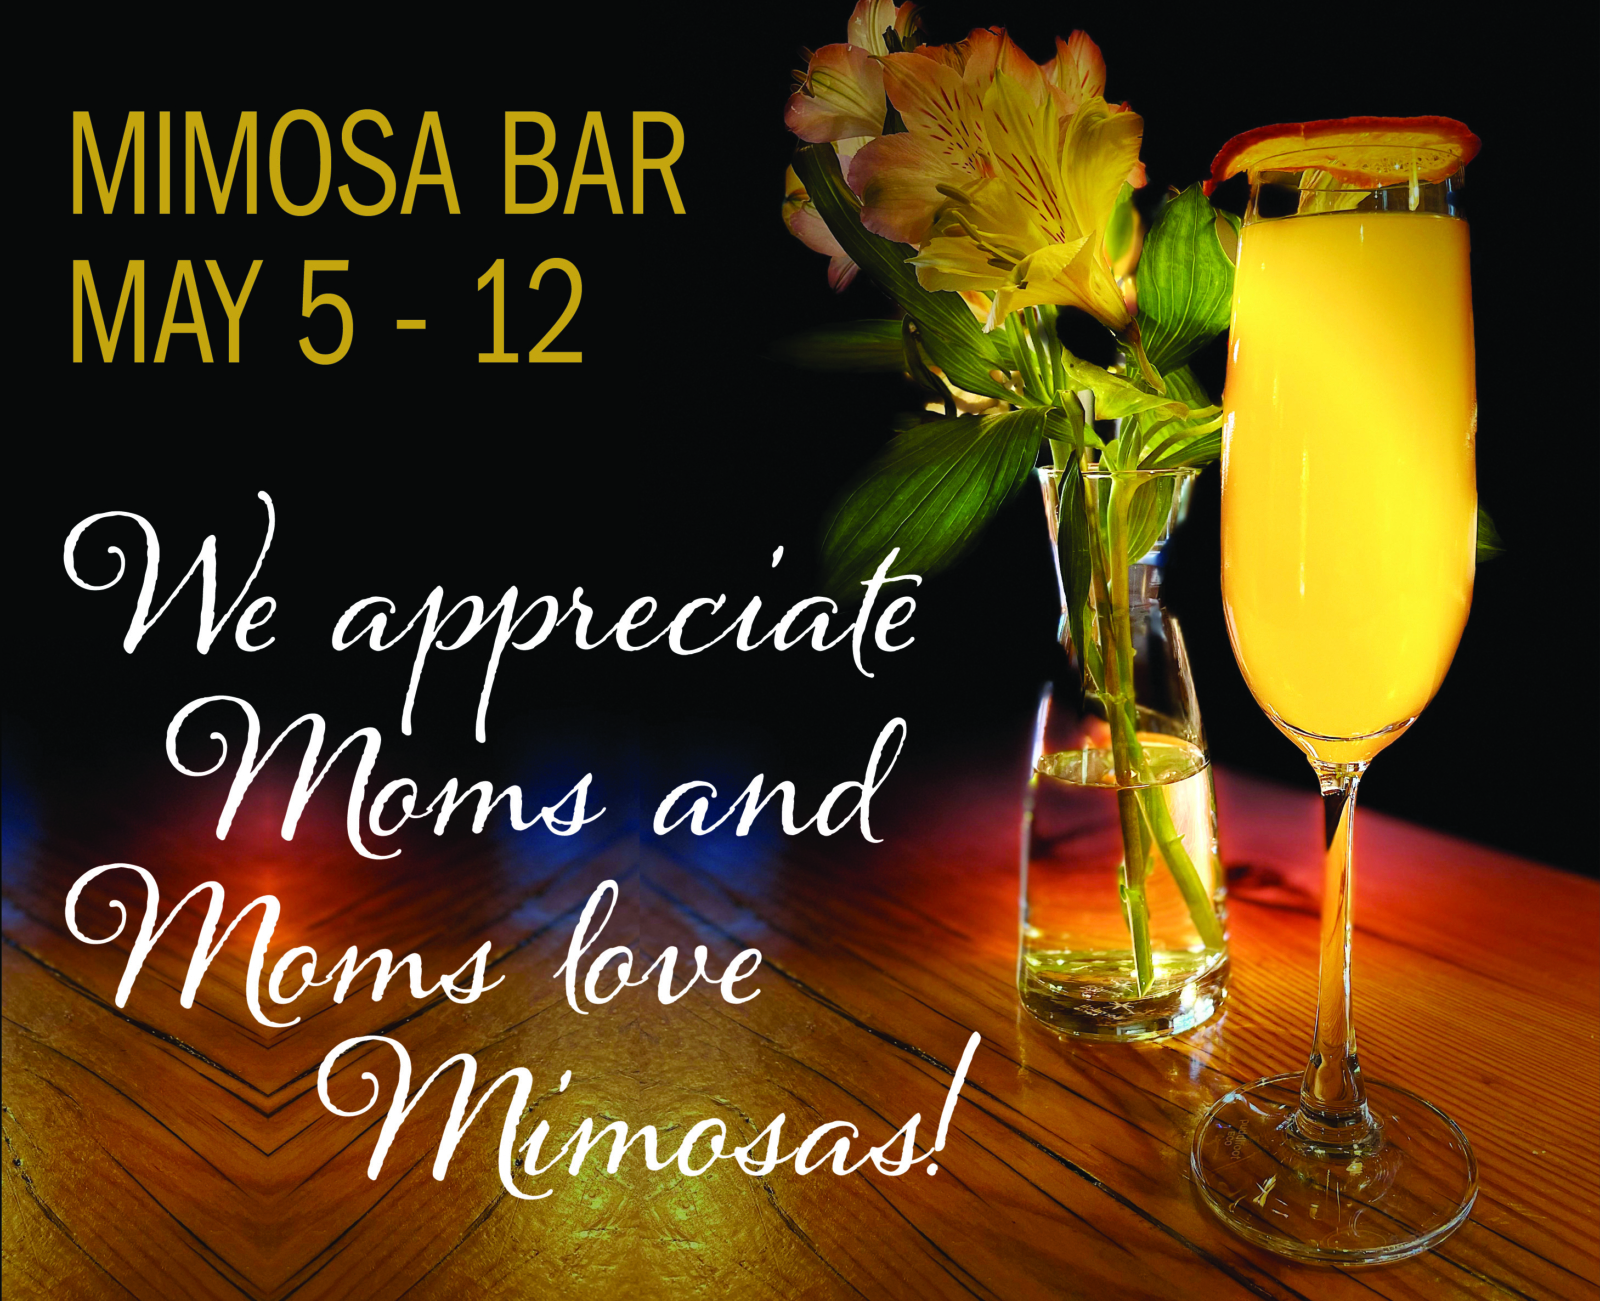 Mimosa and flowers for Mothers' Day